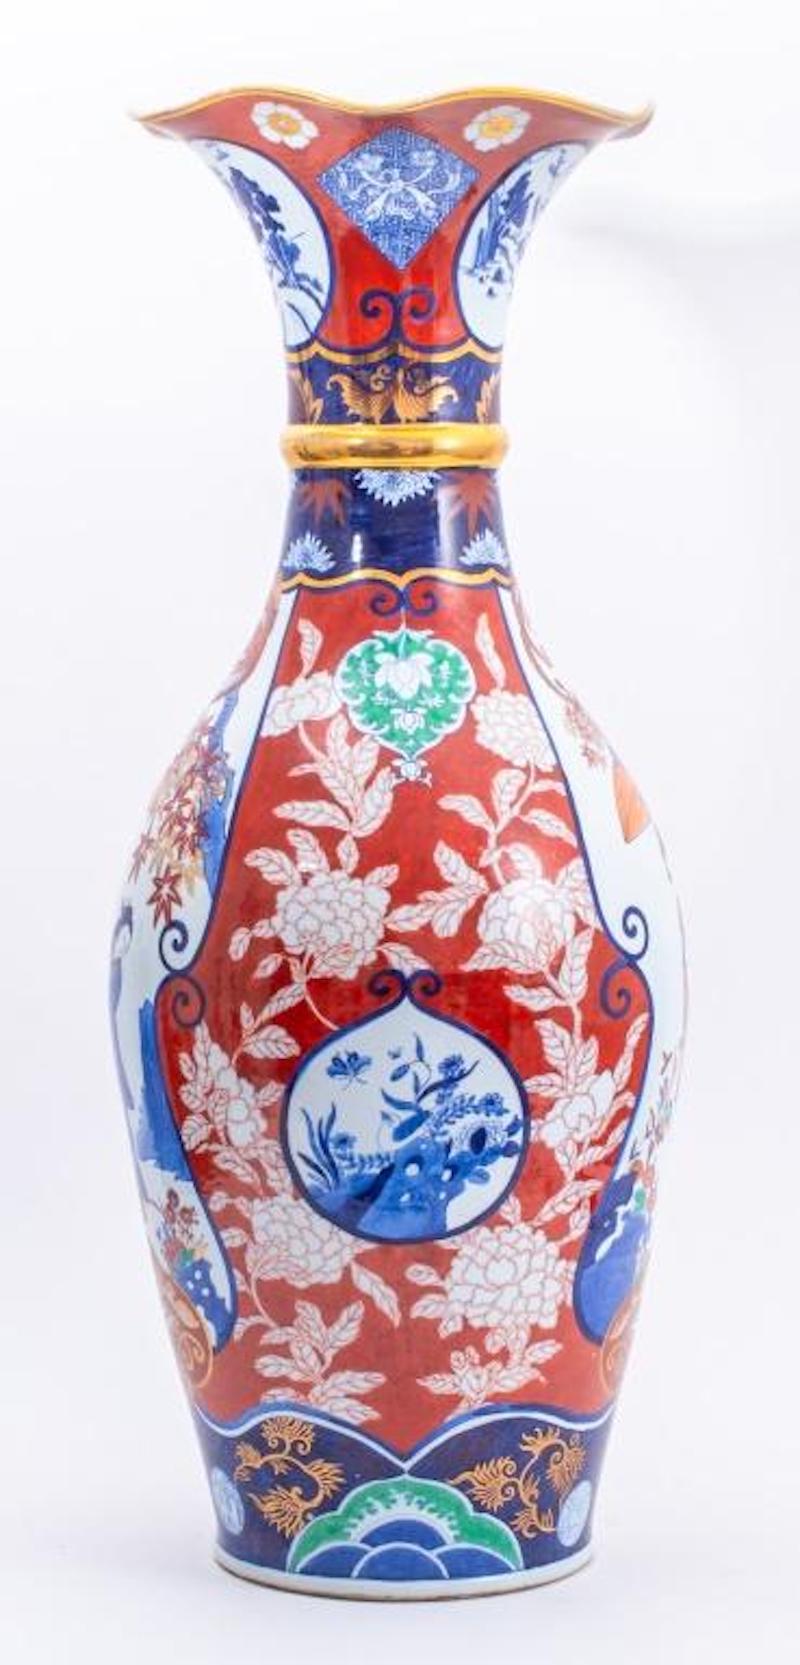 Very Large hand painted and decorated / gilt Japanese floor vases in the Imari porcelain. The vase features exterior / interior hand painted Japanese scene in the Meiji Period with a trumpet neck shape. Every hand painted scene is adorned in